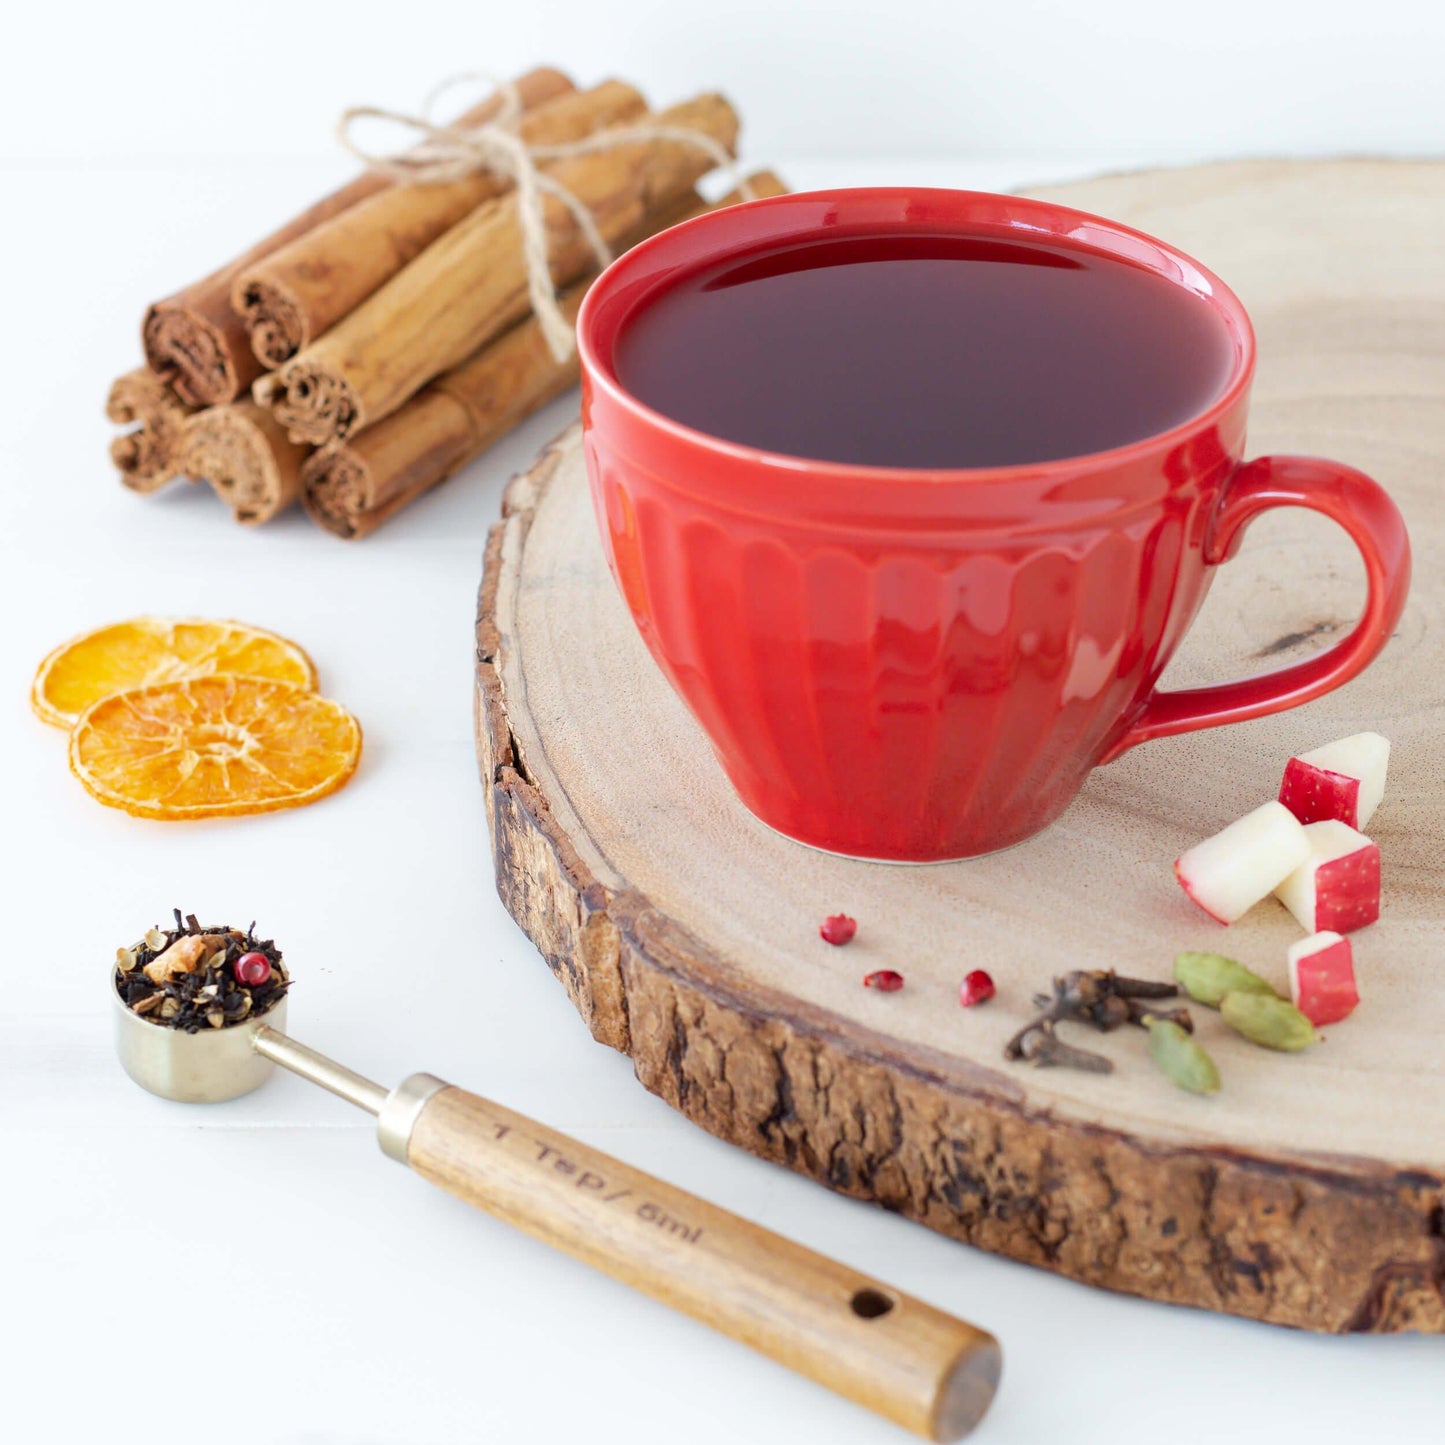 Solstice Spice Black Tea shown as brewed tea in a red cup displayed on a wooden disk, with orange slices, cinnamon sticks and other ingredients nearby